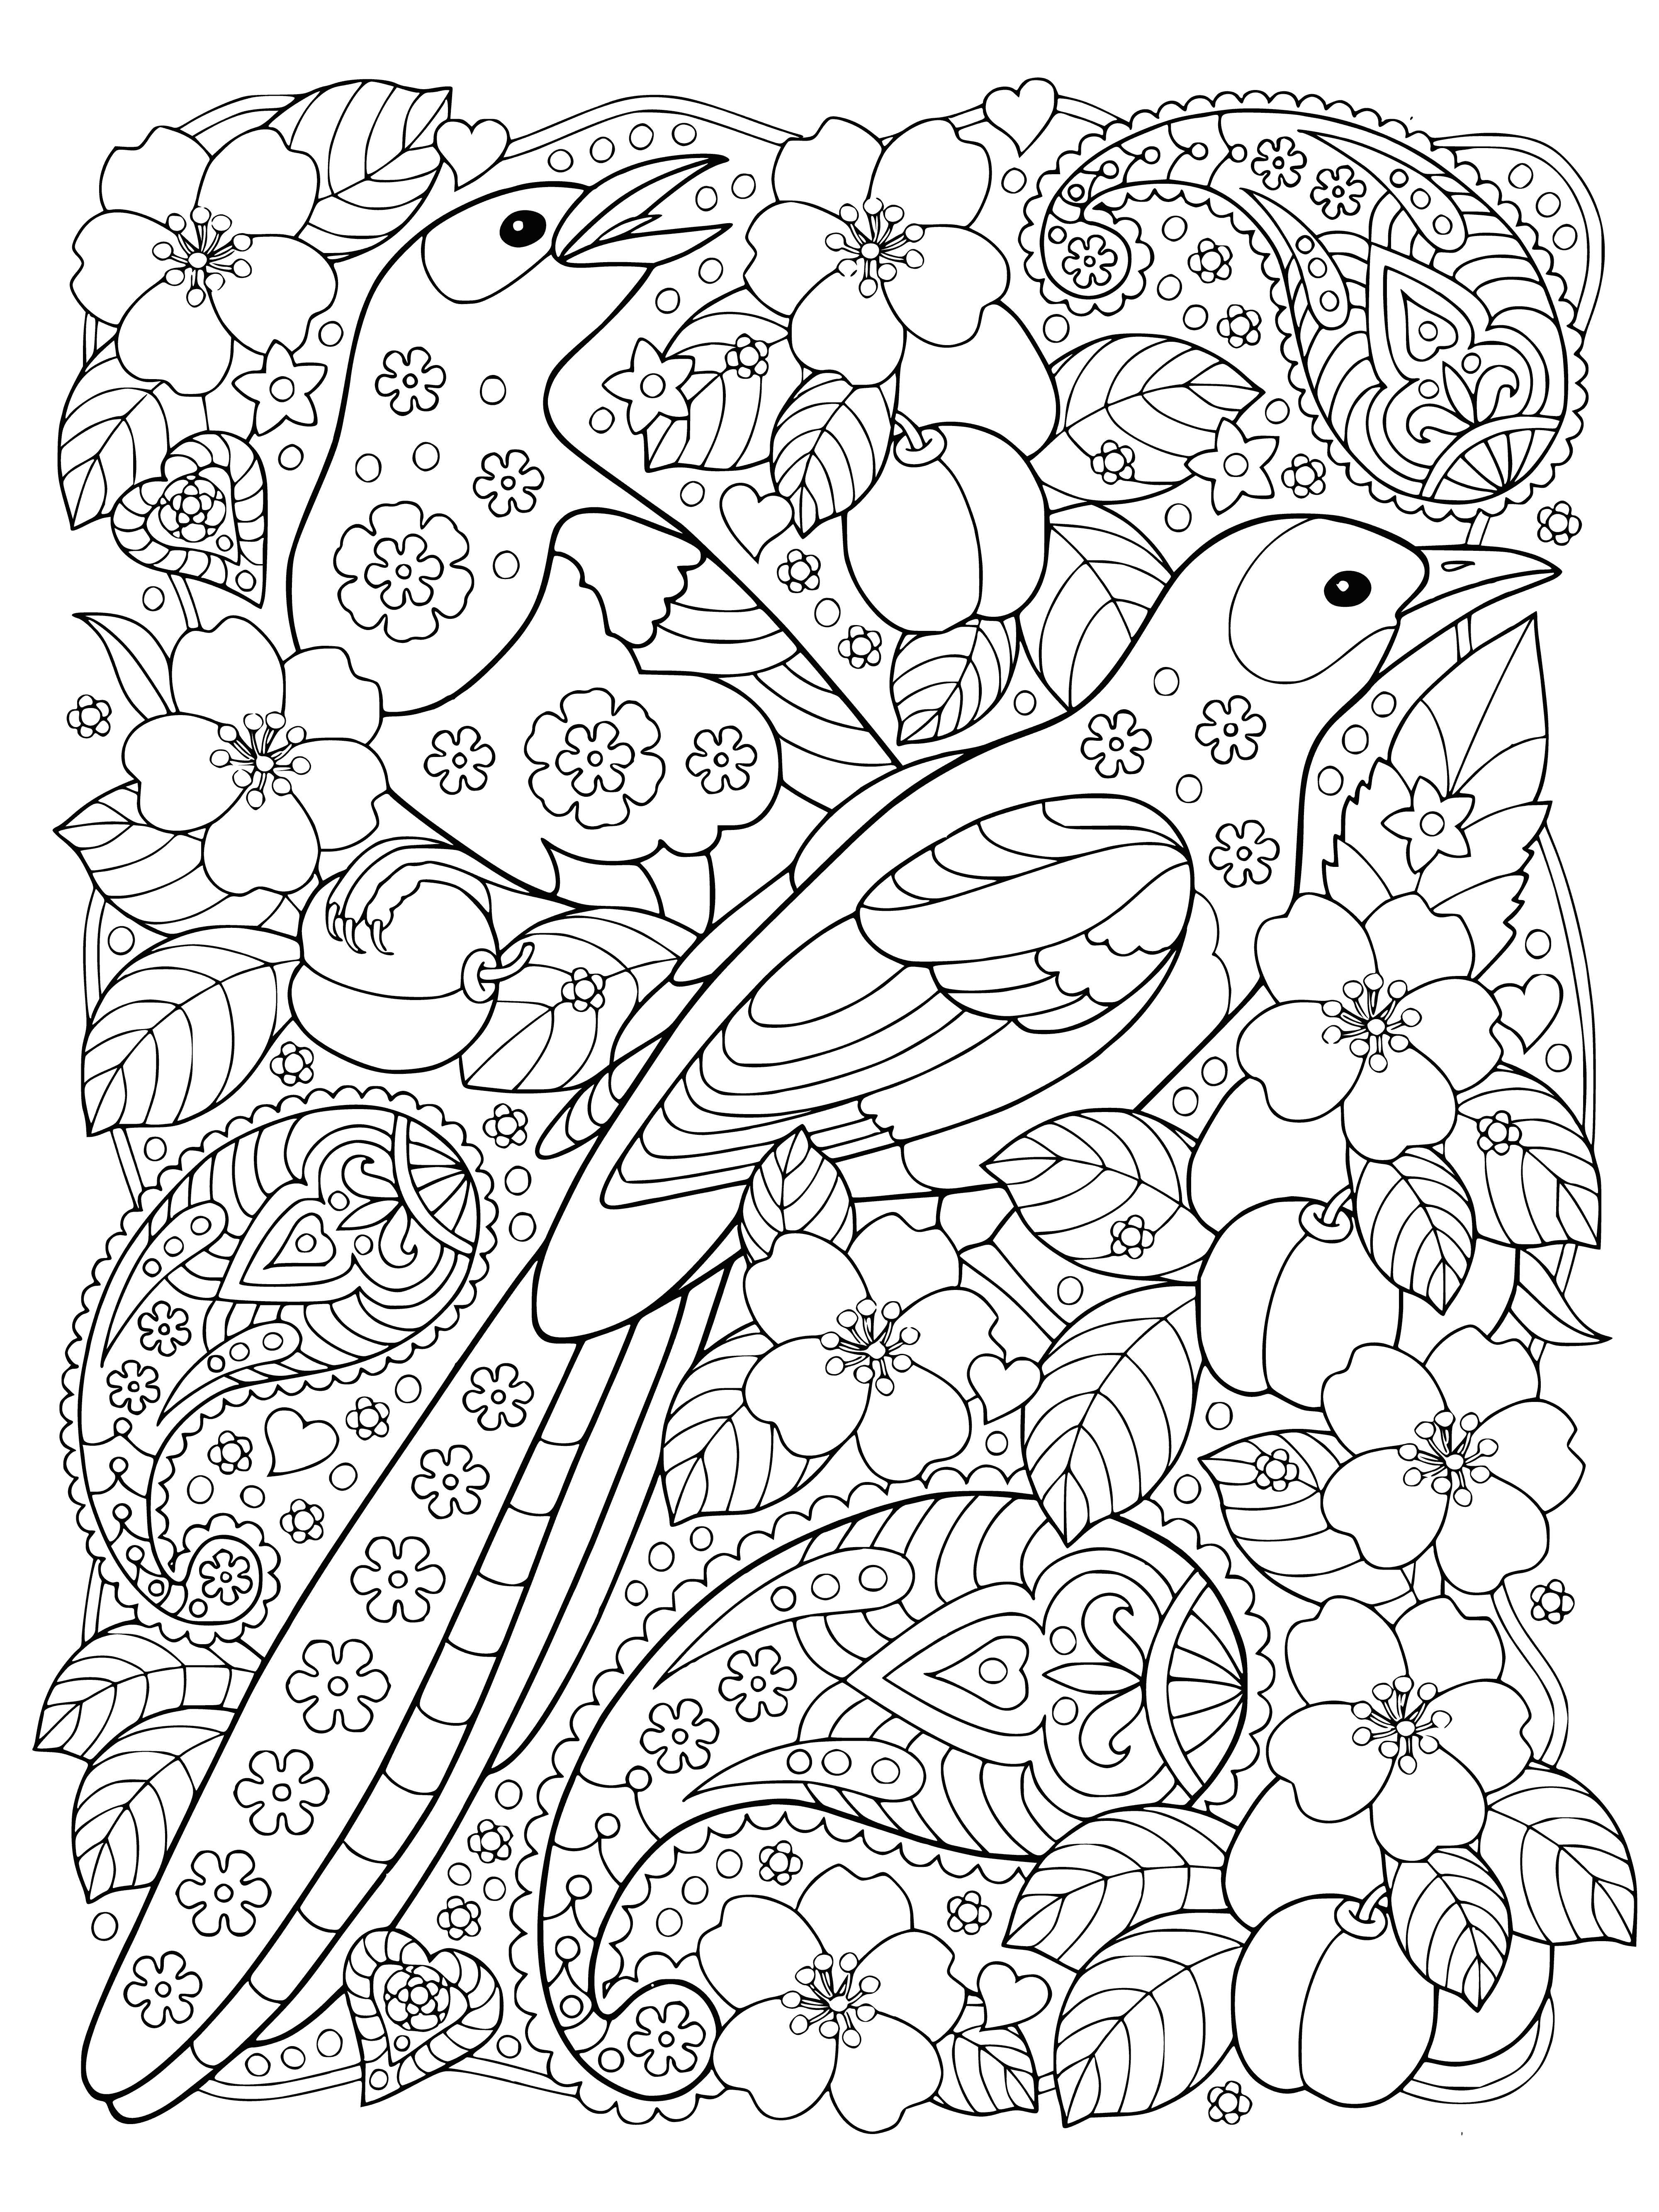 coloring page: 3 birds on branches with intertwining vines and colorful leaves/flowers. Two have flowers in beaks and one has a flower behind its ear.